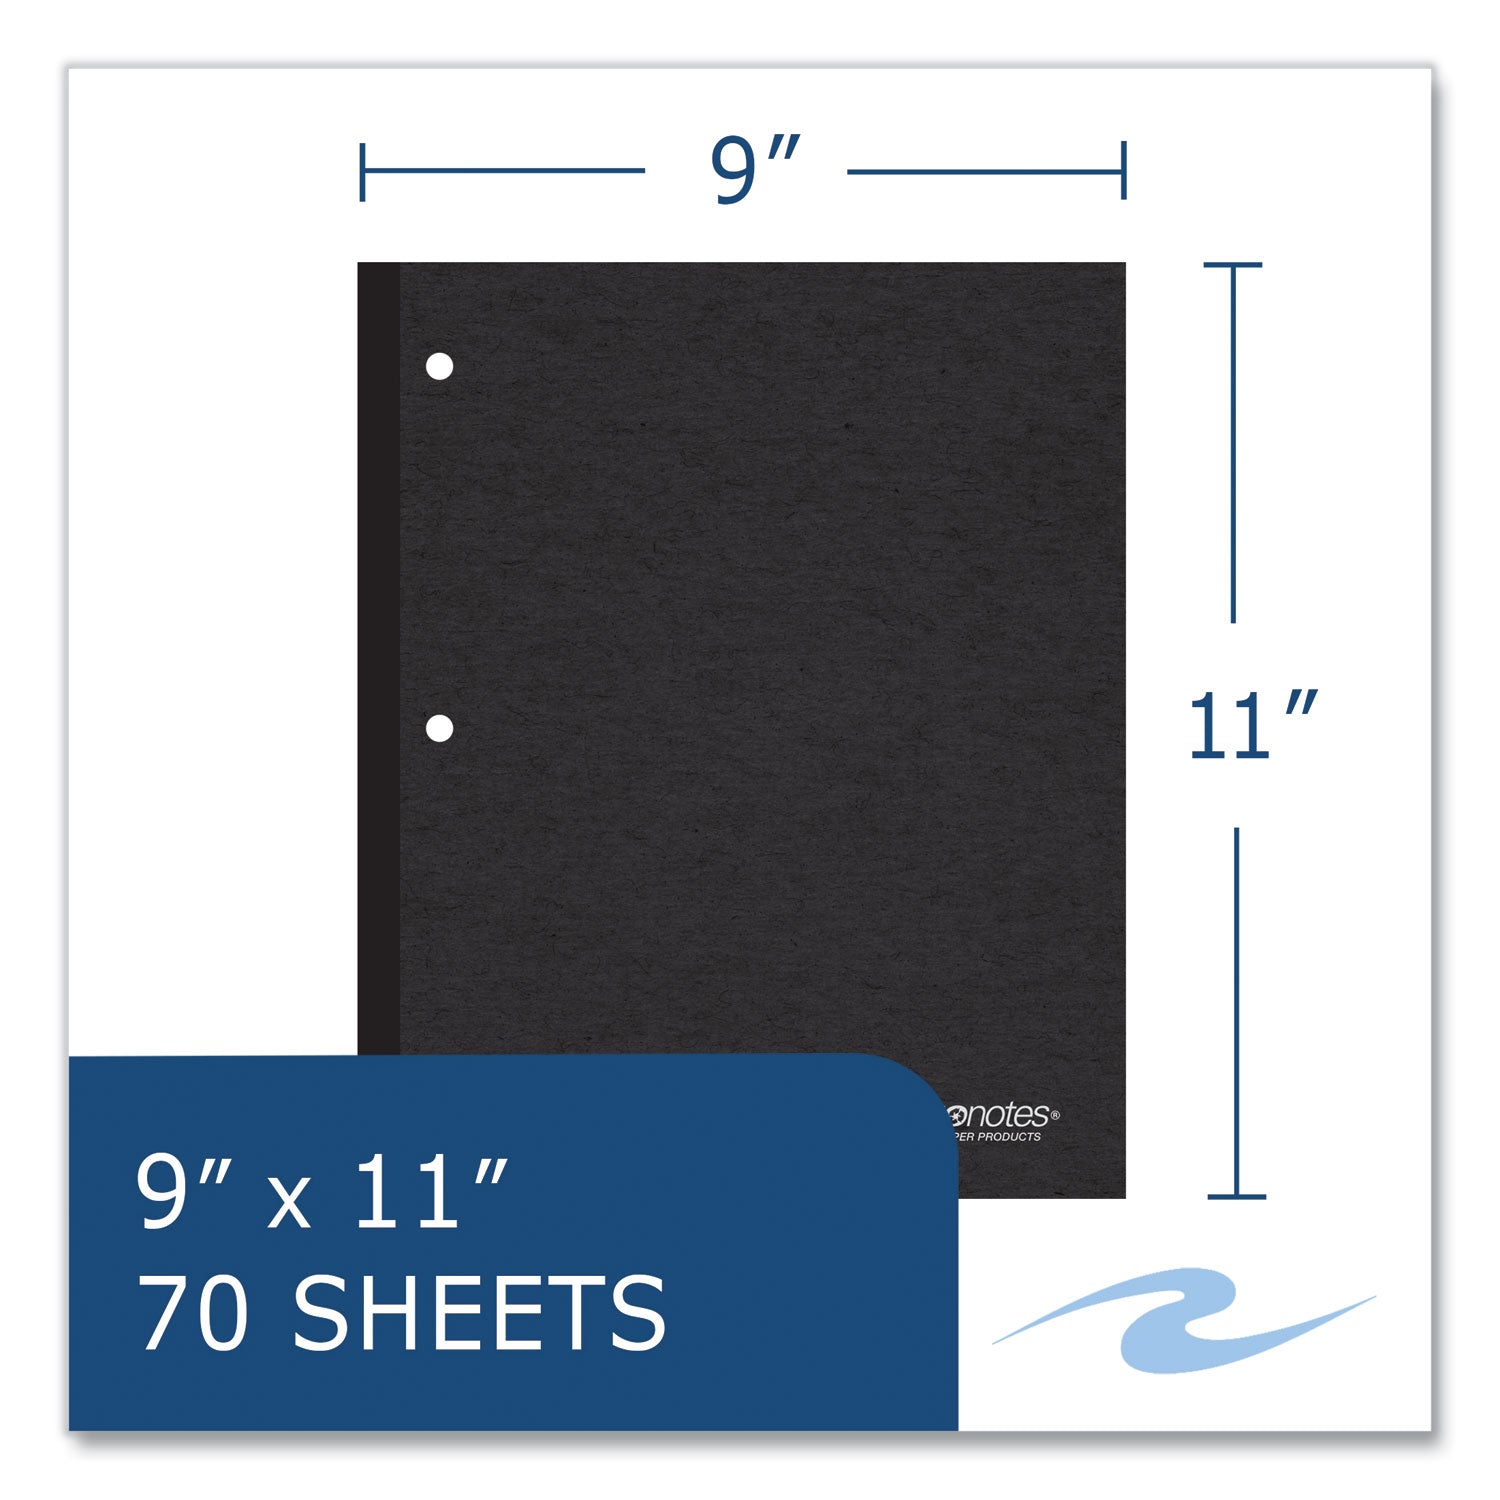 earthtones-wireless-1-subject-notebook-med-college-rule-random-asst-covers-70-11x85-sheets-24-ctships-in-4-6-bus-days_roa20198cs - 3